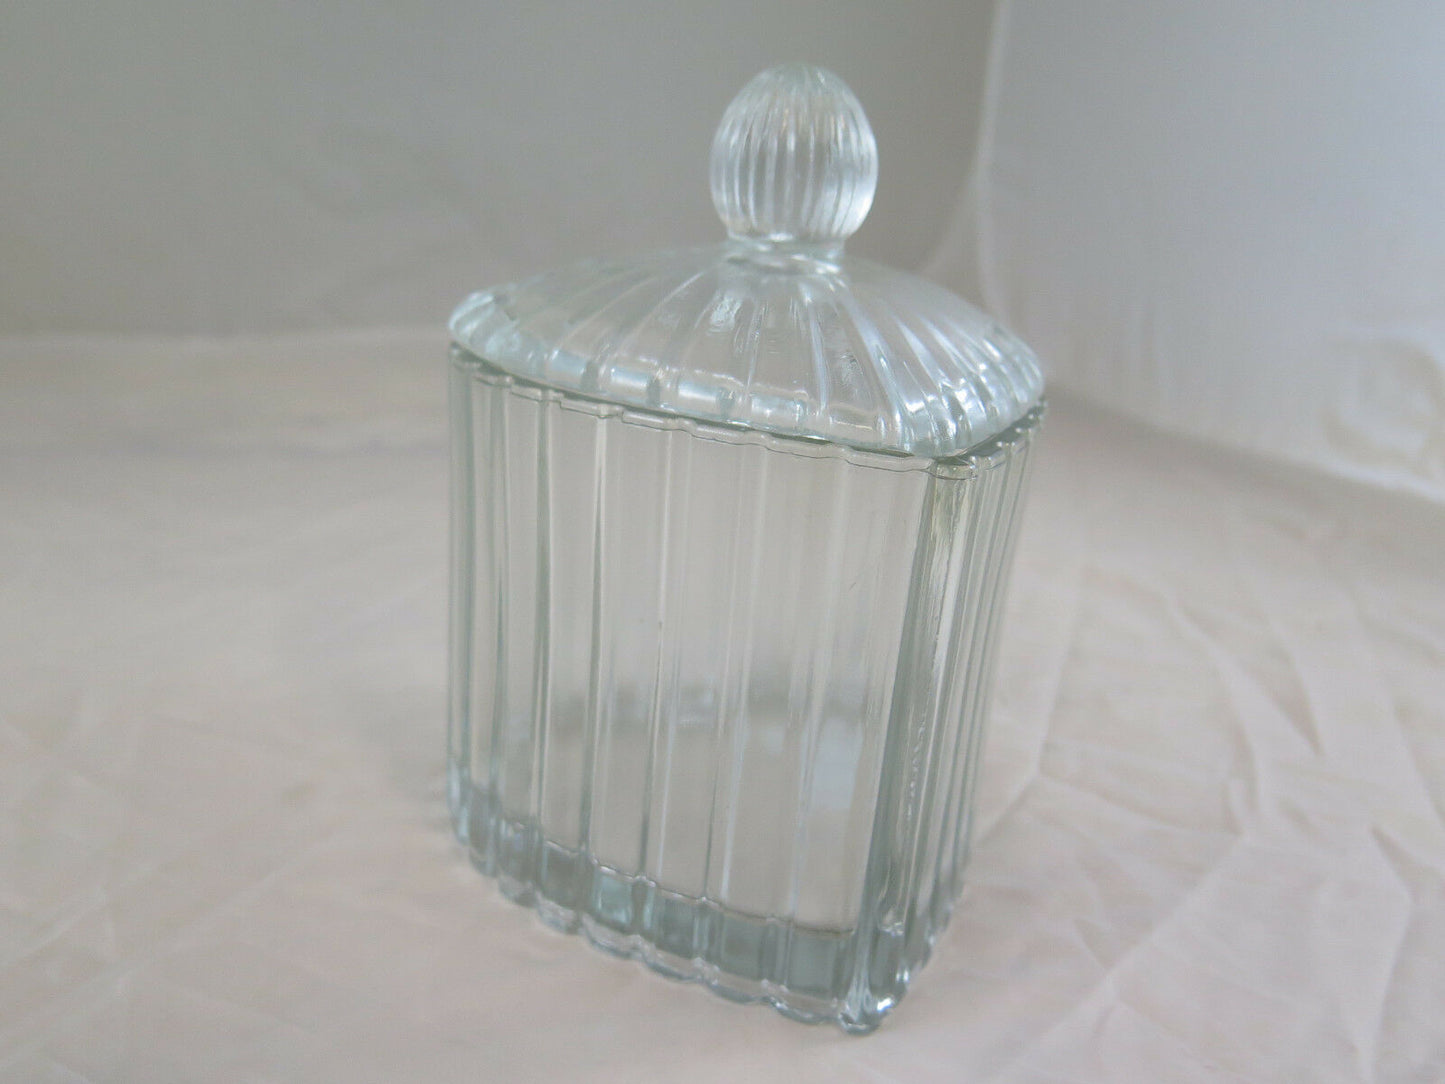 VINTAGE HEART SHAPED GLASS BOX FOR CANDY VINTAGE GLASS VASE R24